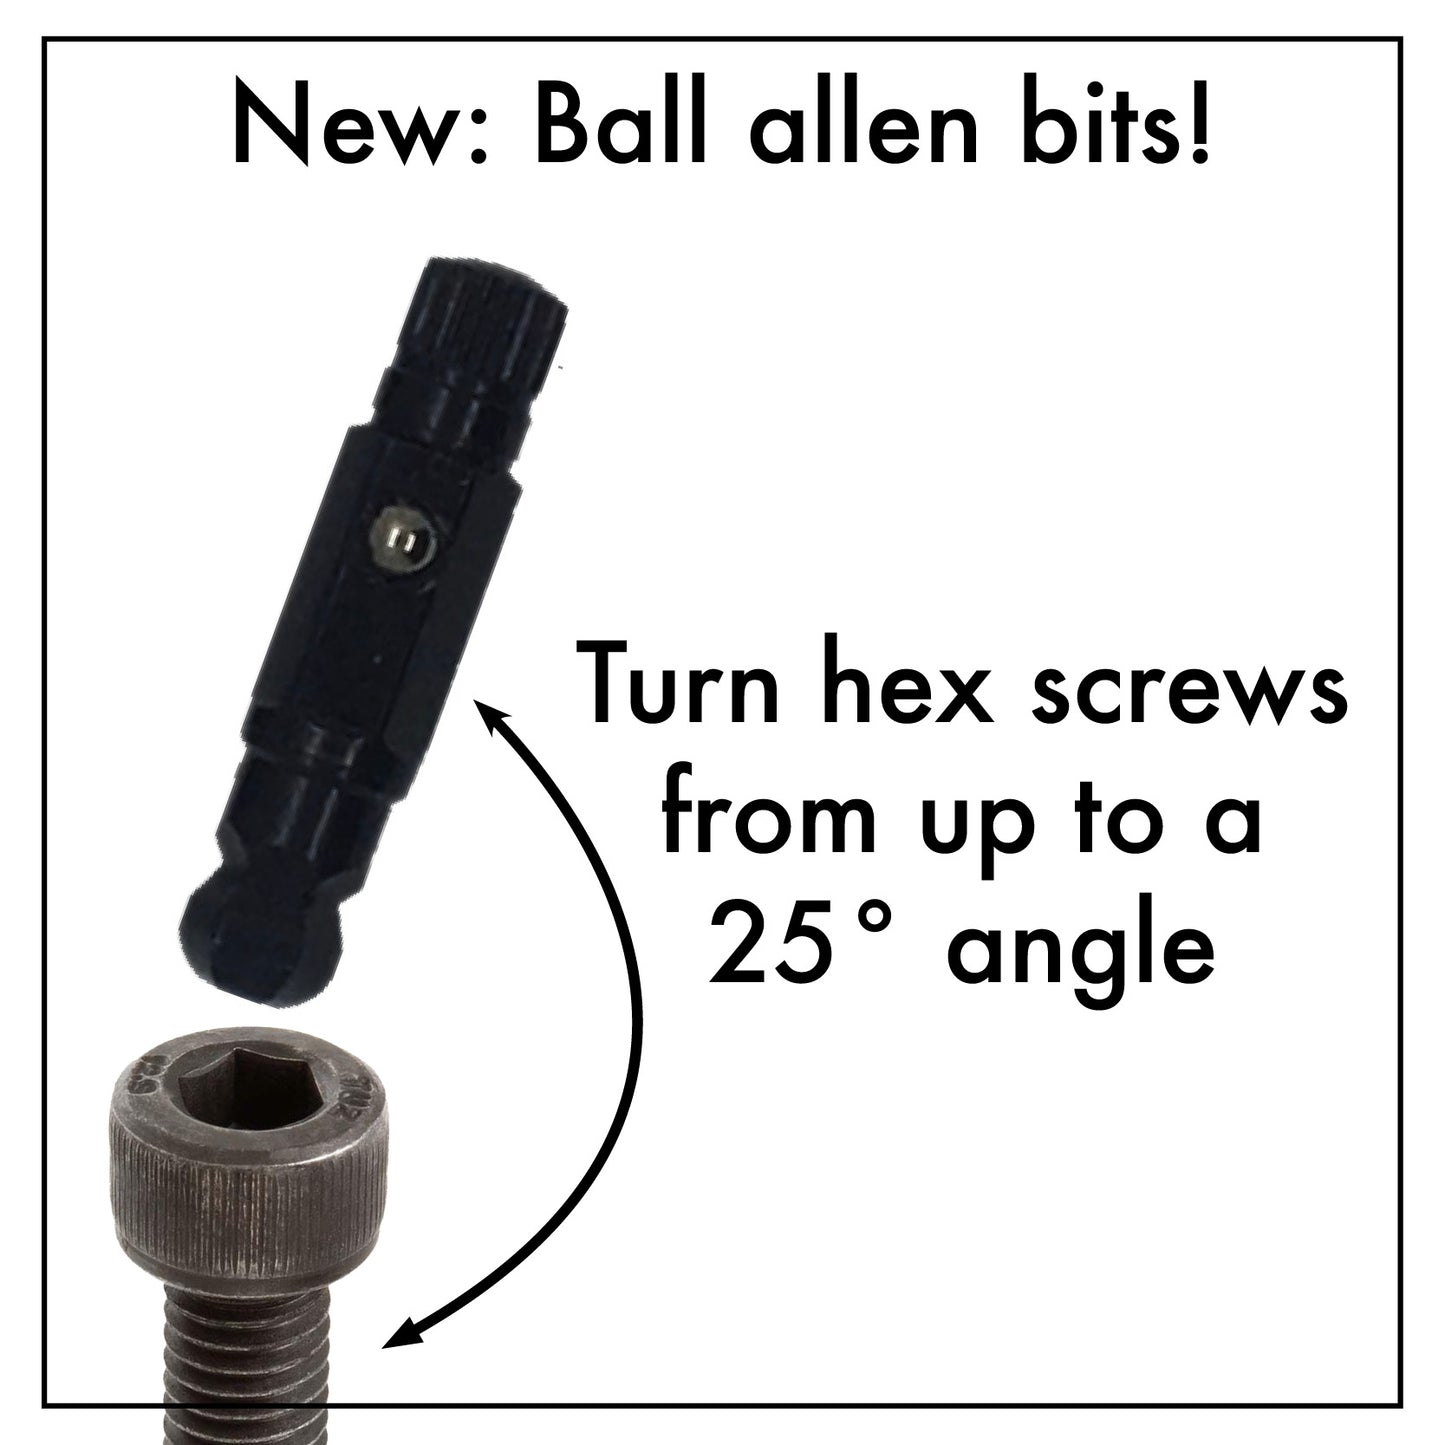 New! Ball Allen Screwdriver Bits - Turn hex screws from up to a 25 degree angle| Chapman MFG